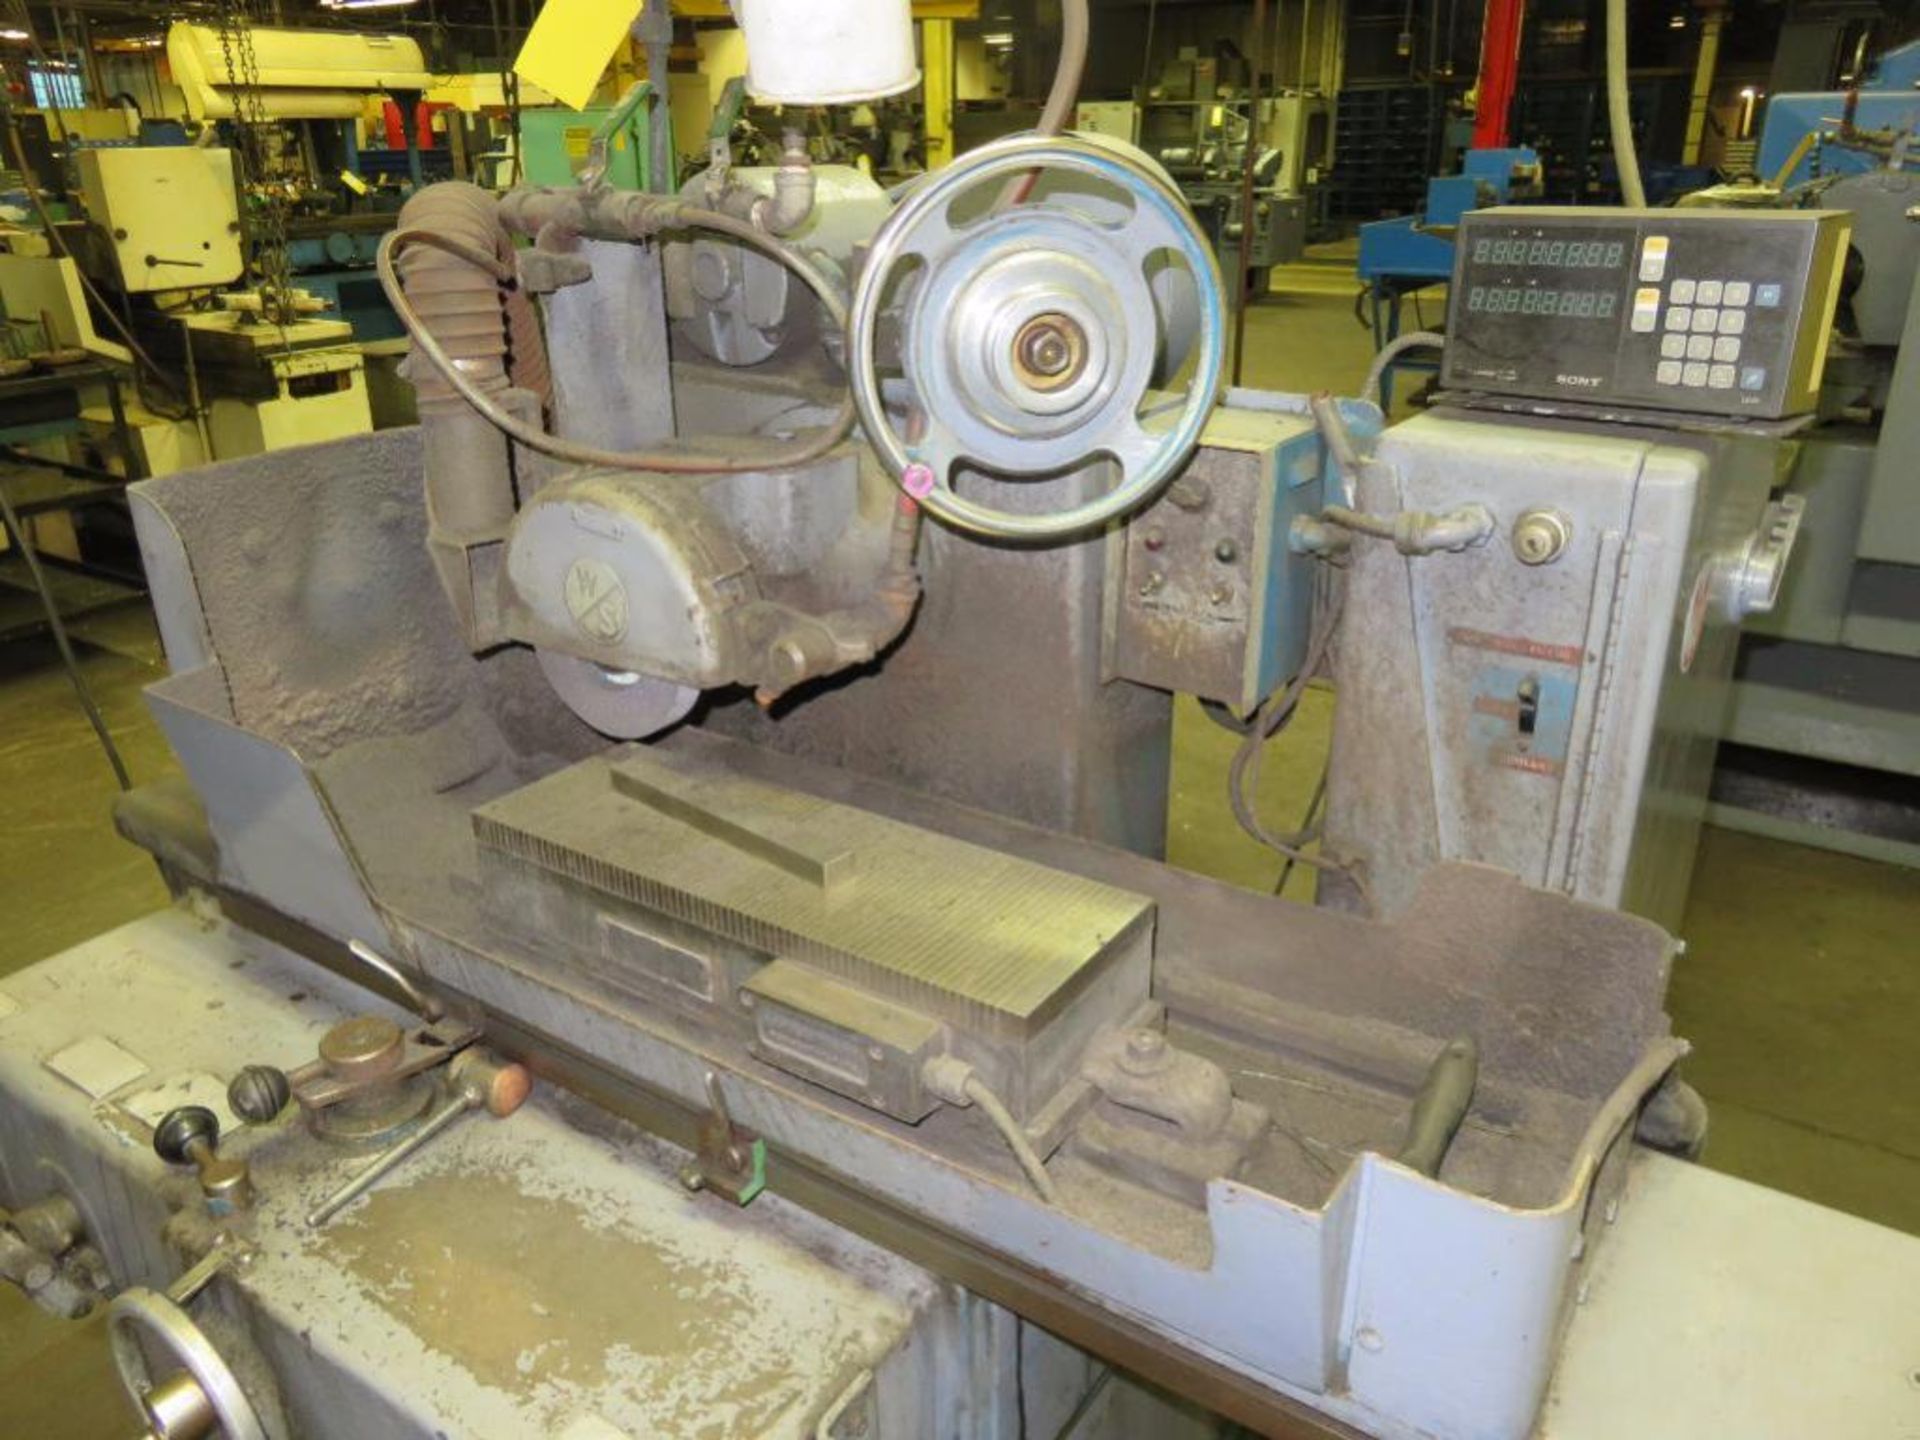 Warner & Swasey 6 in. x 18 in. Hydraulic Surface Grinder Model 6X18S-3, S/N 30011 (Location H) - Image 2 of 2